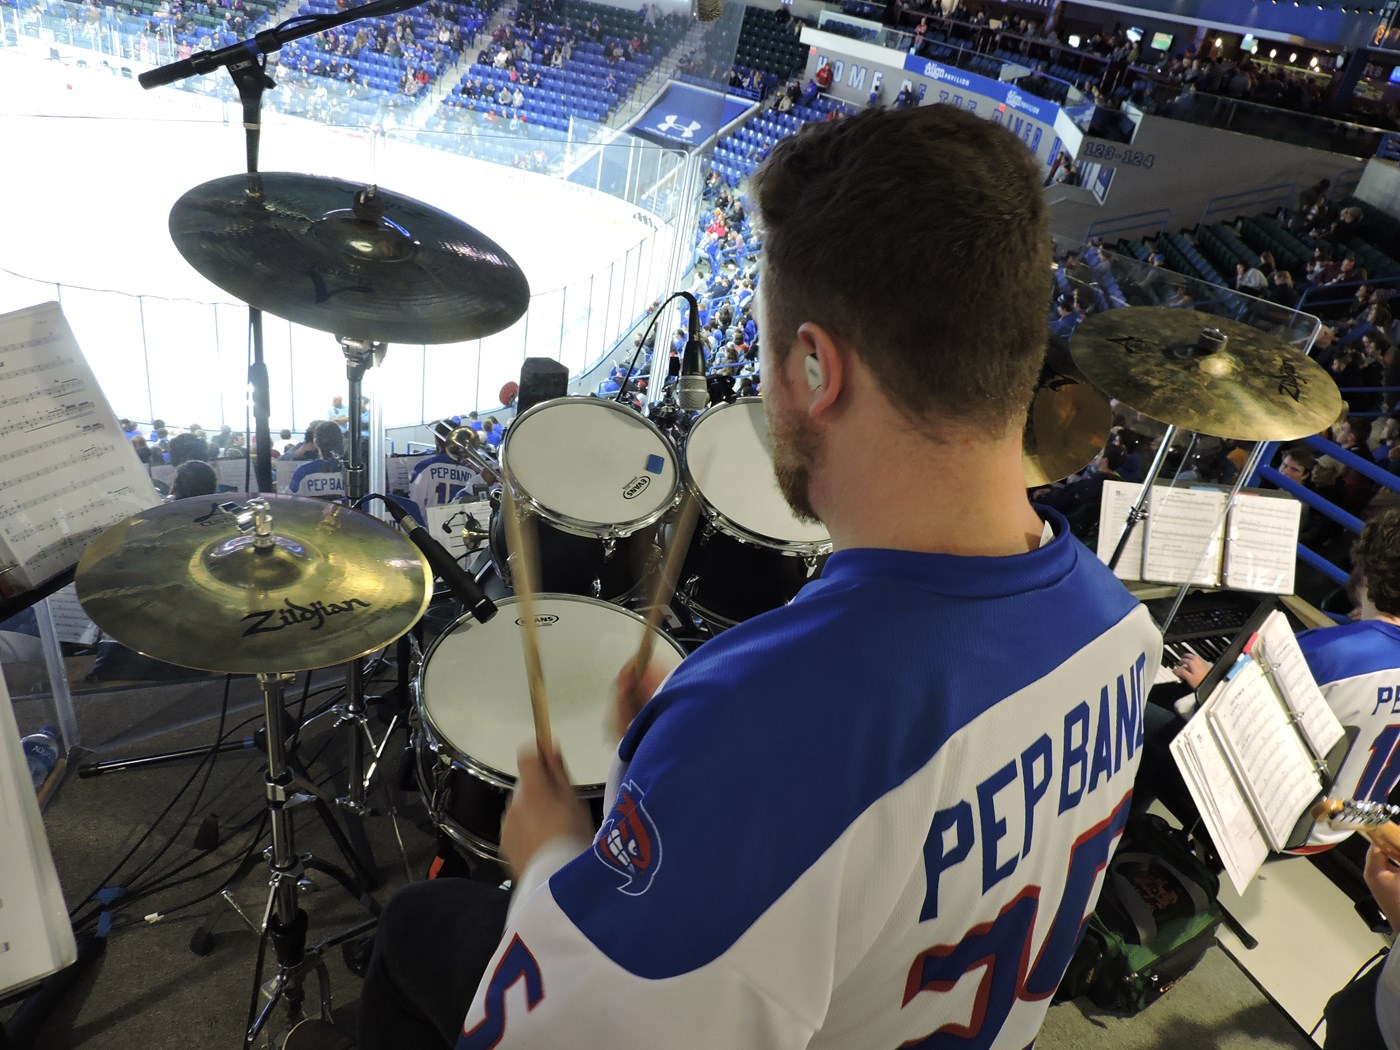 Drumset musician in hockey pep band shirt overlooks the entire pep band and ice surface at the Tsongas Center on UMass Lowell's campus where the River Hawks ice hockey team is competing.